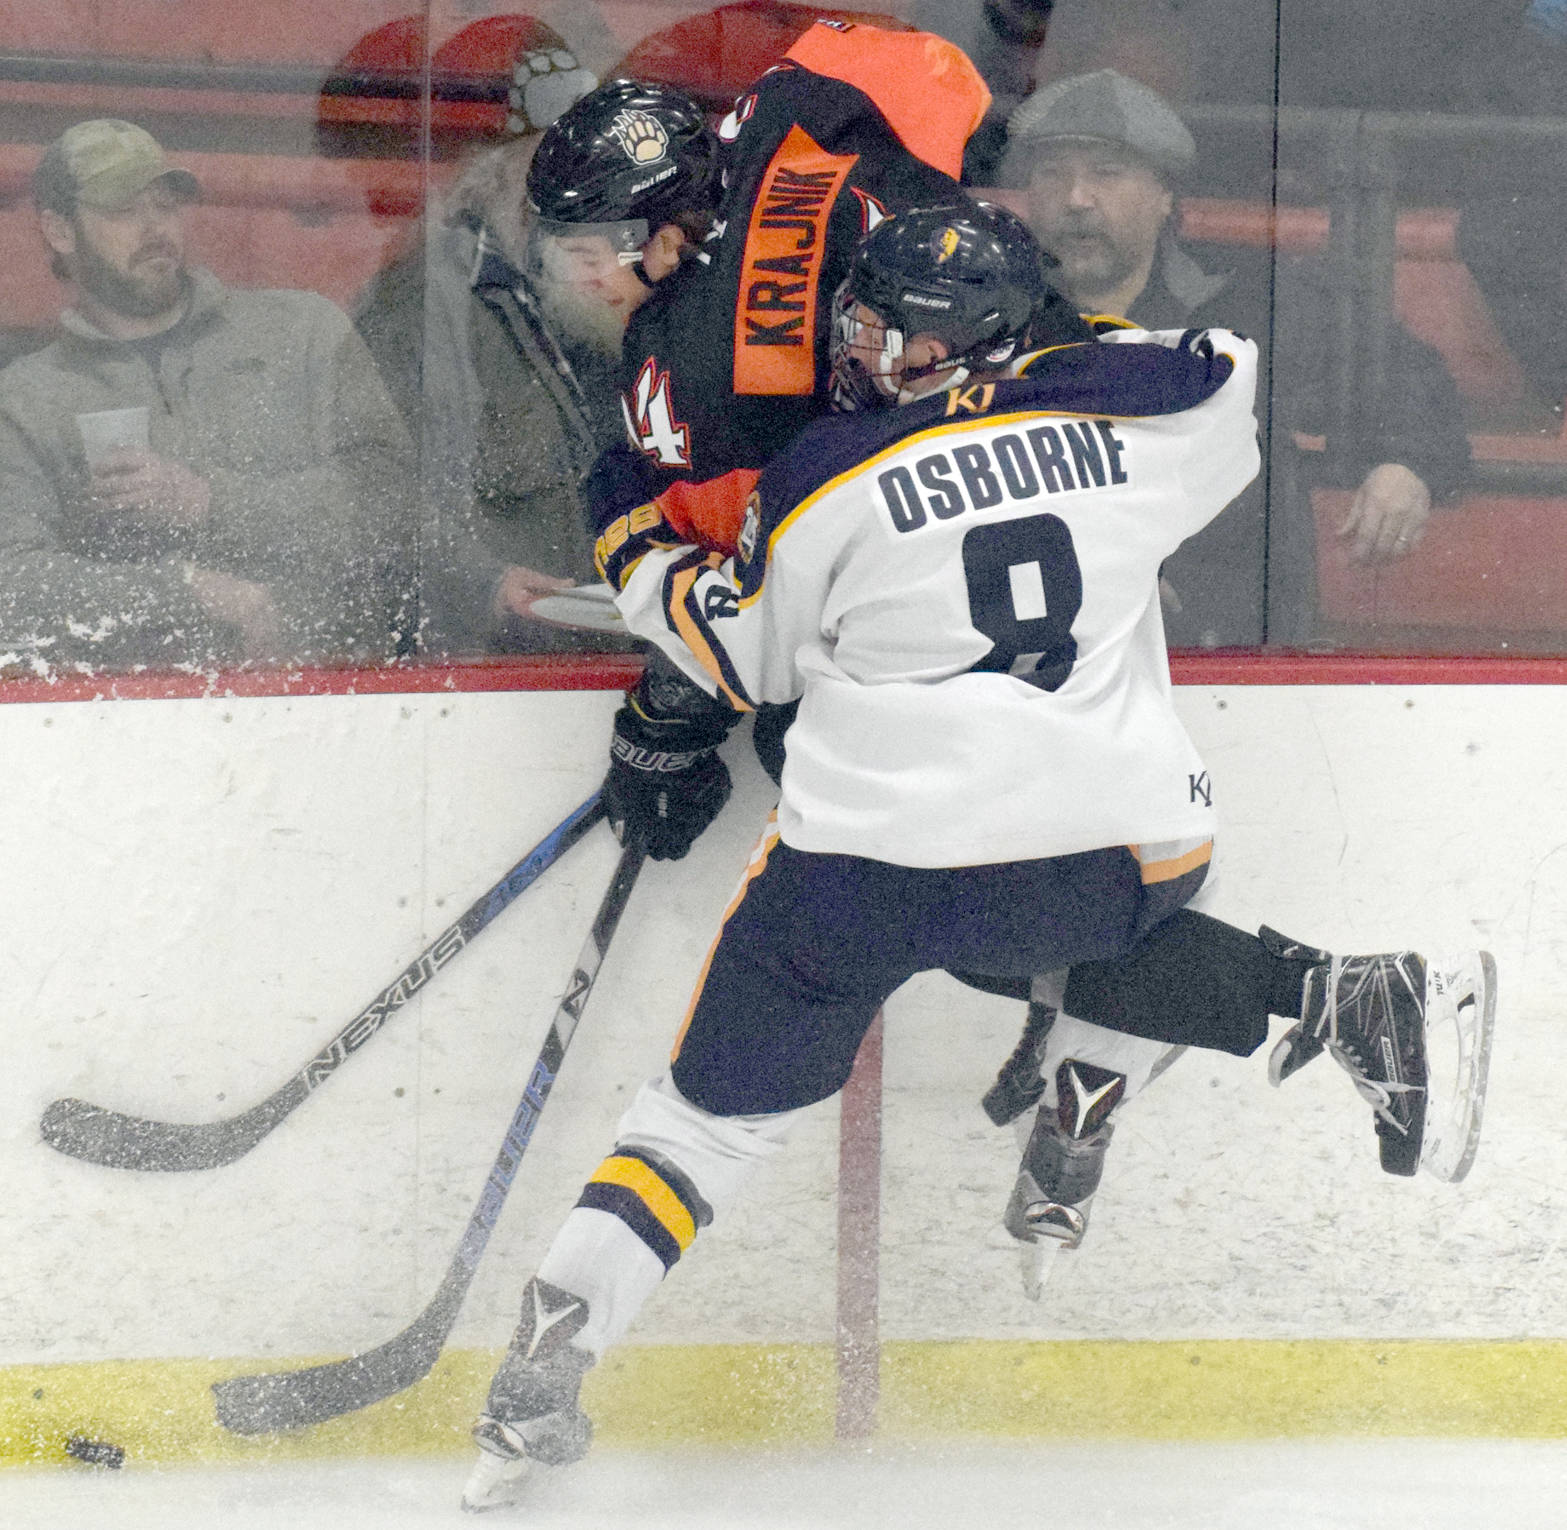 Kenai River Brown Bears forward Zach Krajnik gets pasted into the boards by Springfield (Illinois) defenseman Max Osborne on Friday, March 16, 2018, at the Soldotna Regional Sports Complex. (Photo by Jeff Helminiak/Peninsula Clarion)